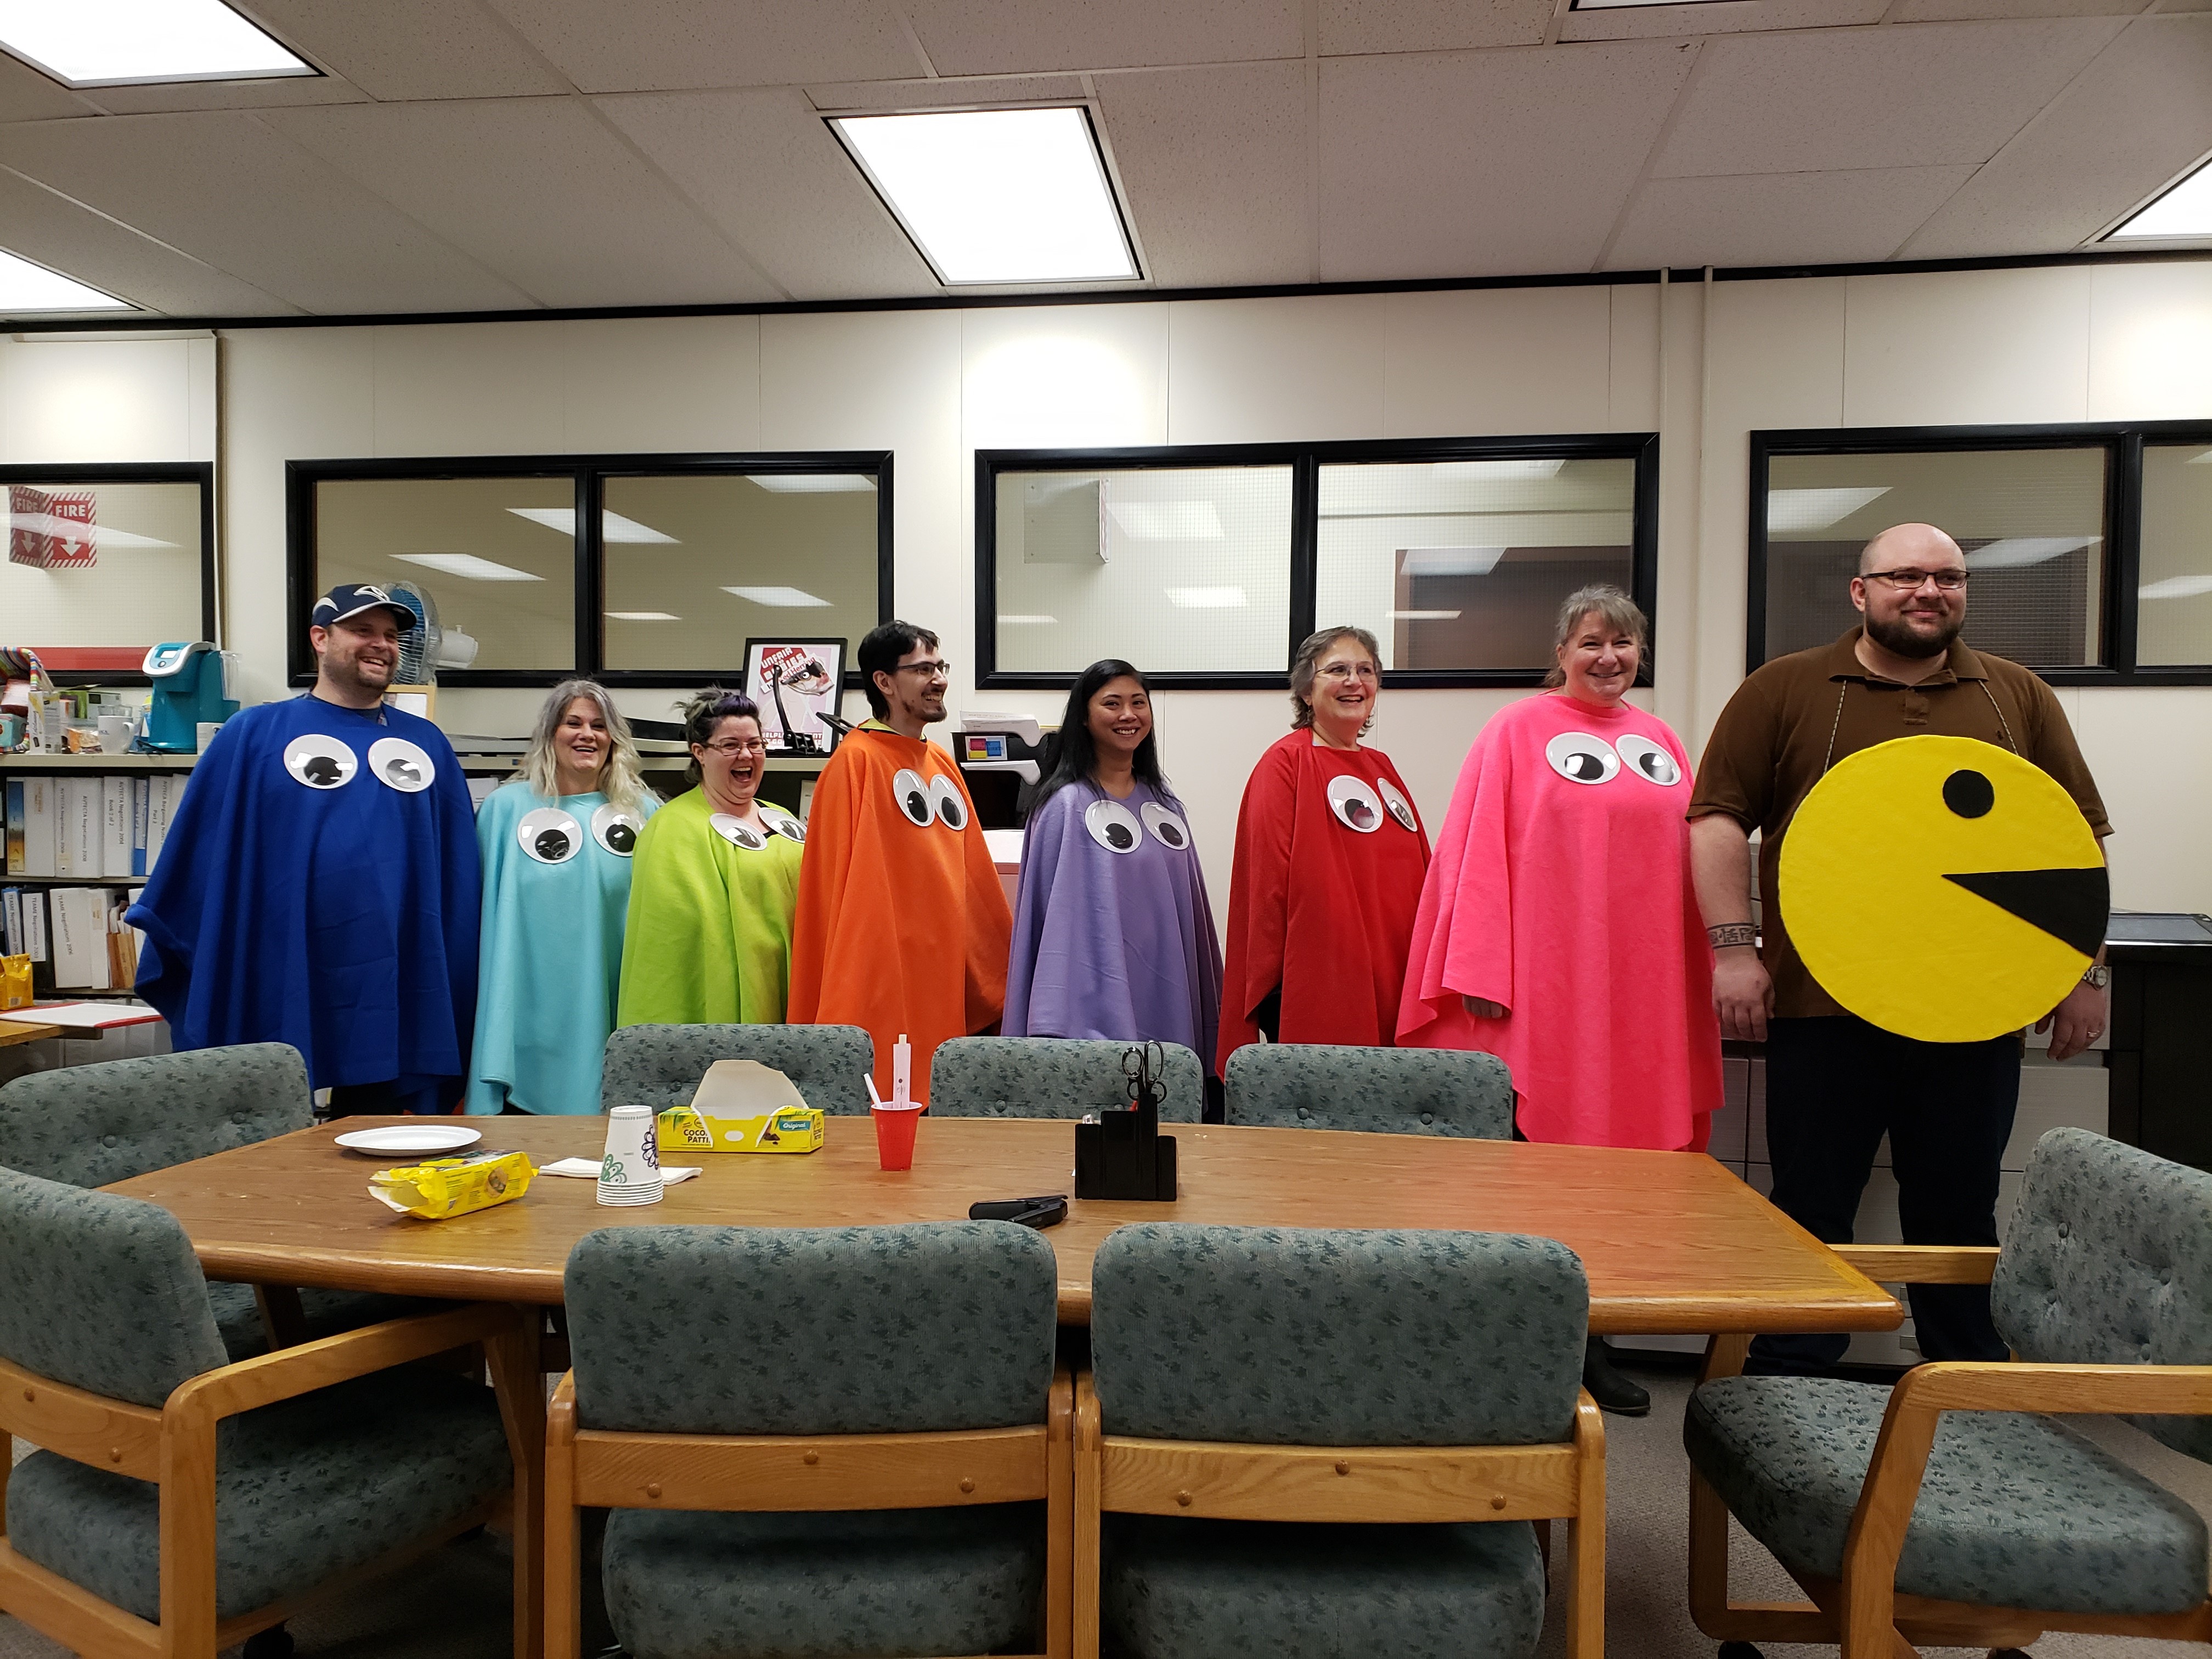 HSS HR Staff dressed as Pacman and ghosts